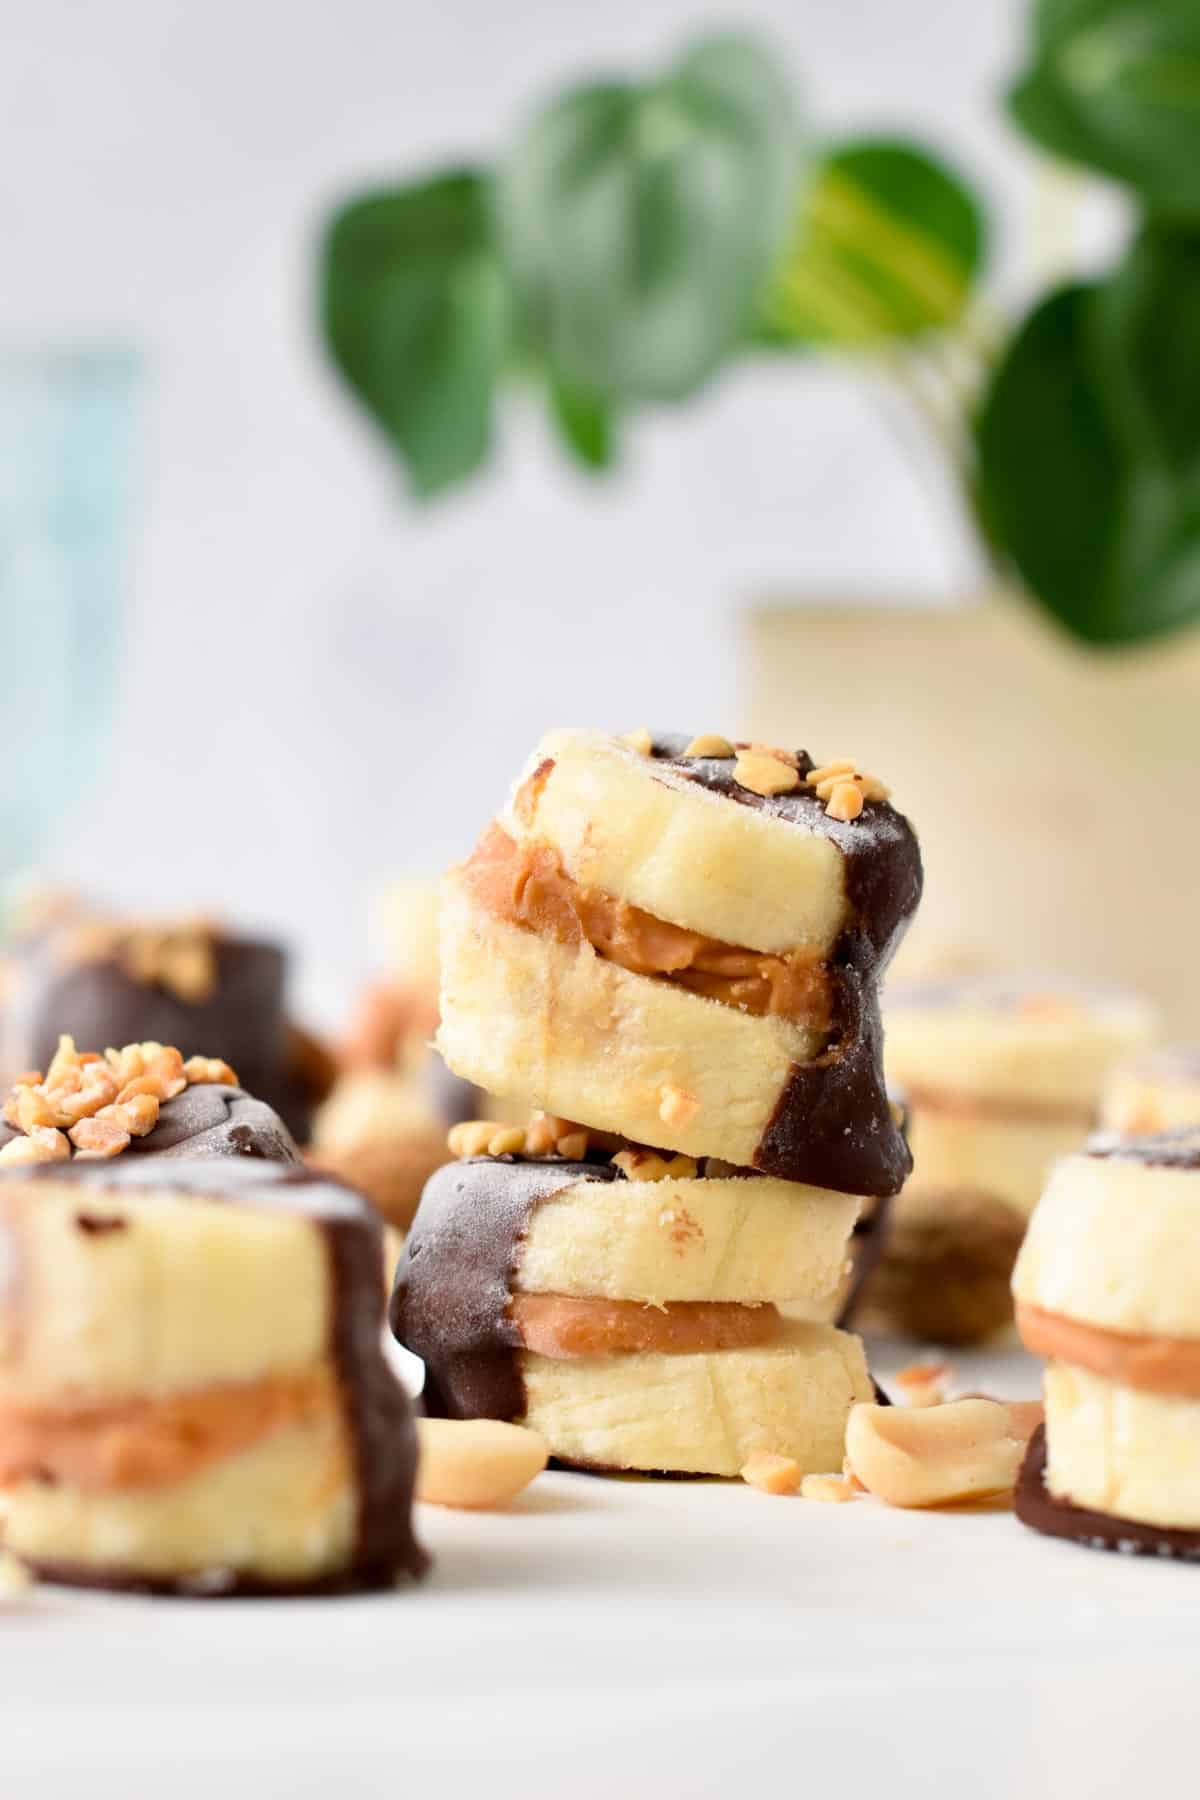 A stack of banana bites filled with peanut butter in the center and half covered with dark chocolate.